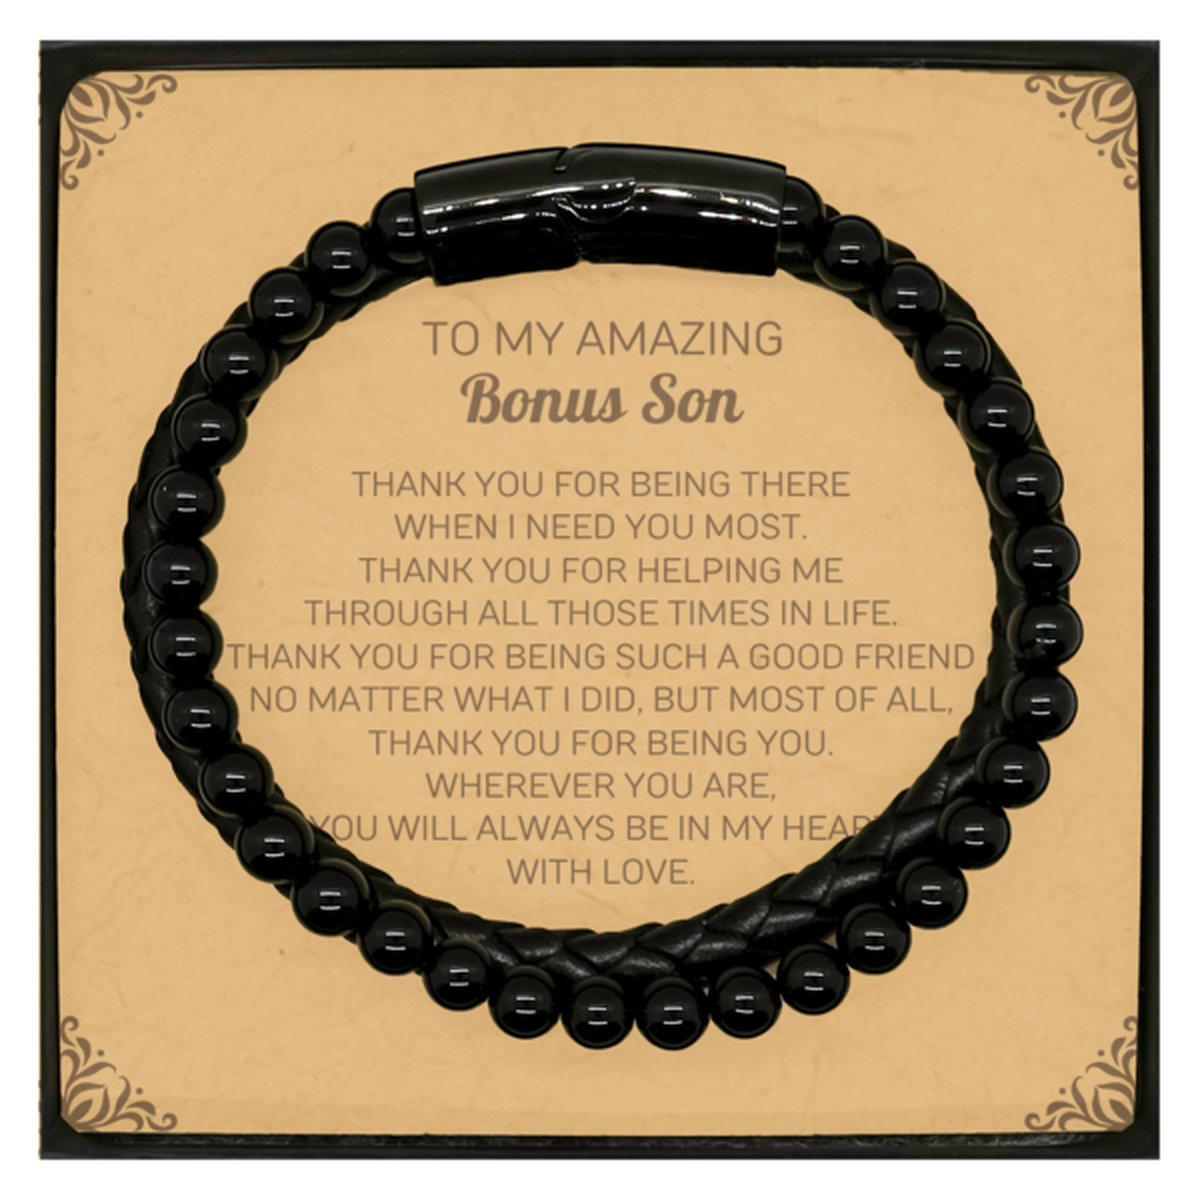 To My Amazing Bonus Son Stone Leather Bracelets, Thank you for being there, Thank You Gifts For Bonus Son, Birthday, Christmas Unique Gifts For Bonus Son